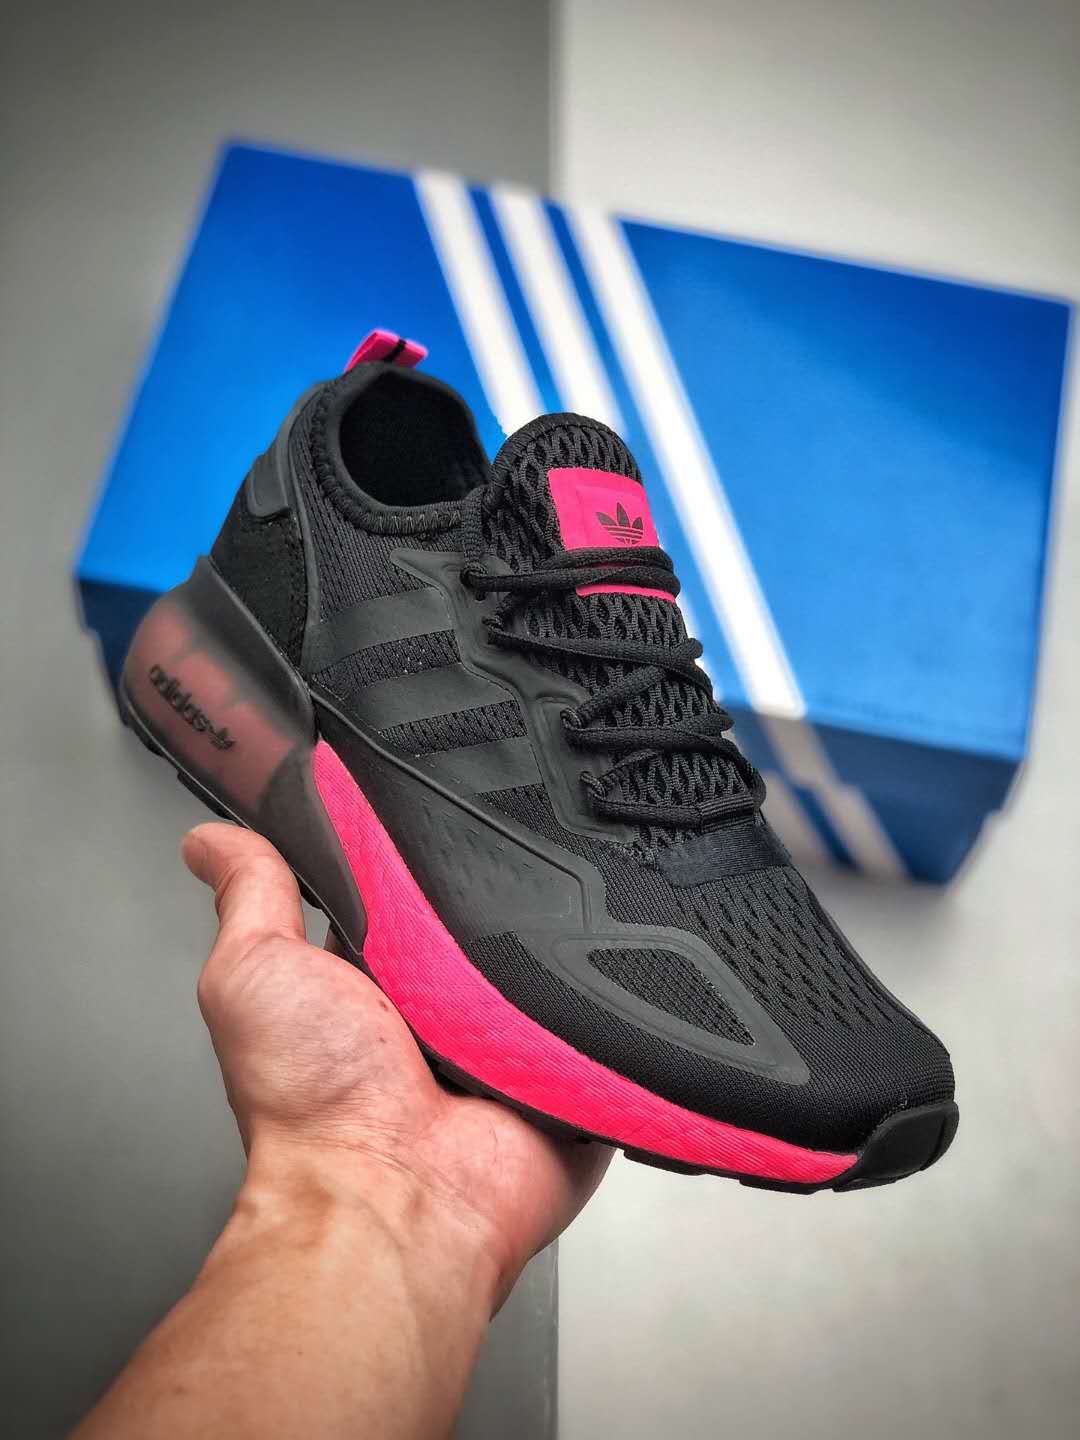 Adidas ZX 2K Boost 'Black Shock Pink' FV8986 - Stylish and Comfortable Footwear